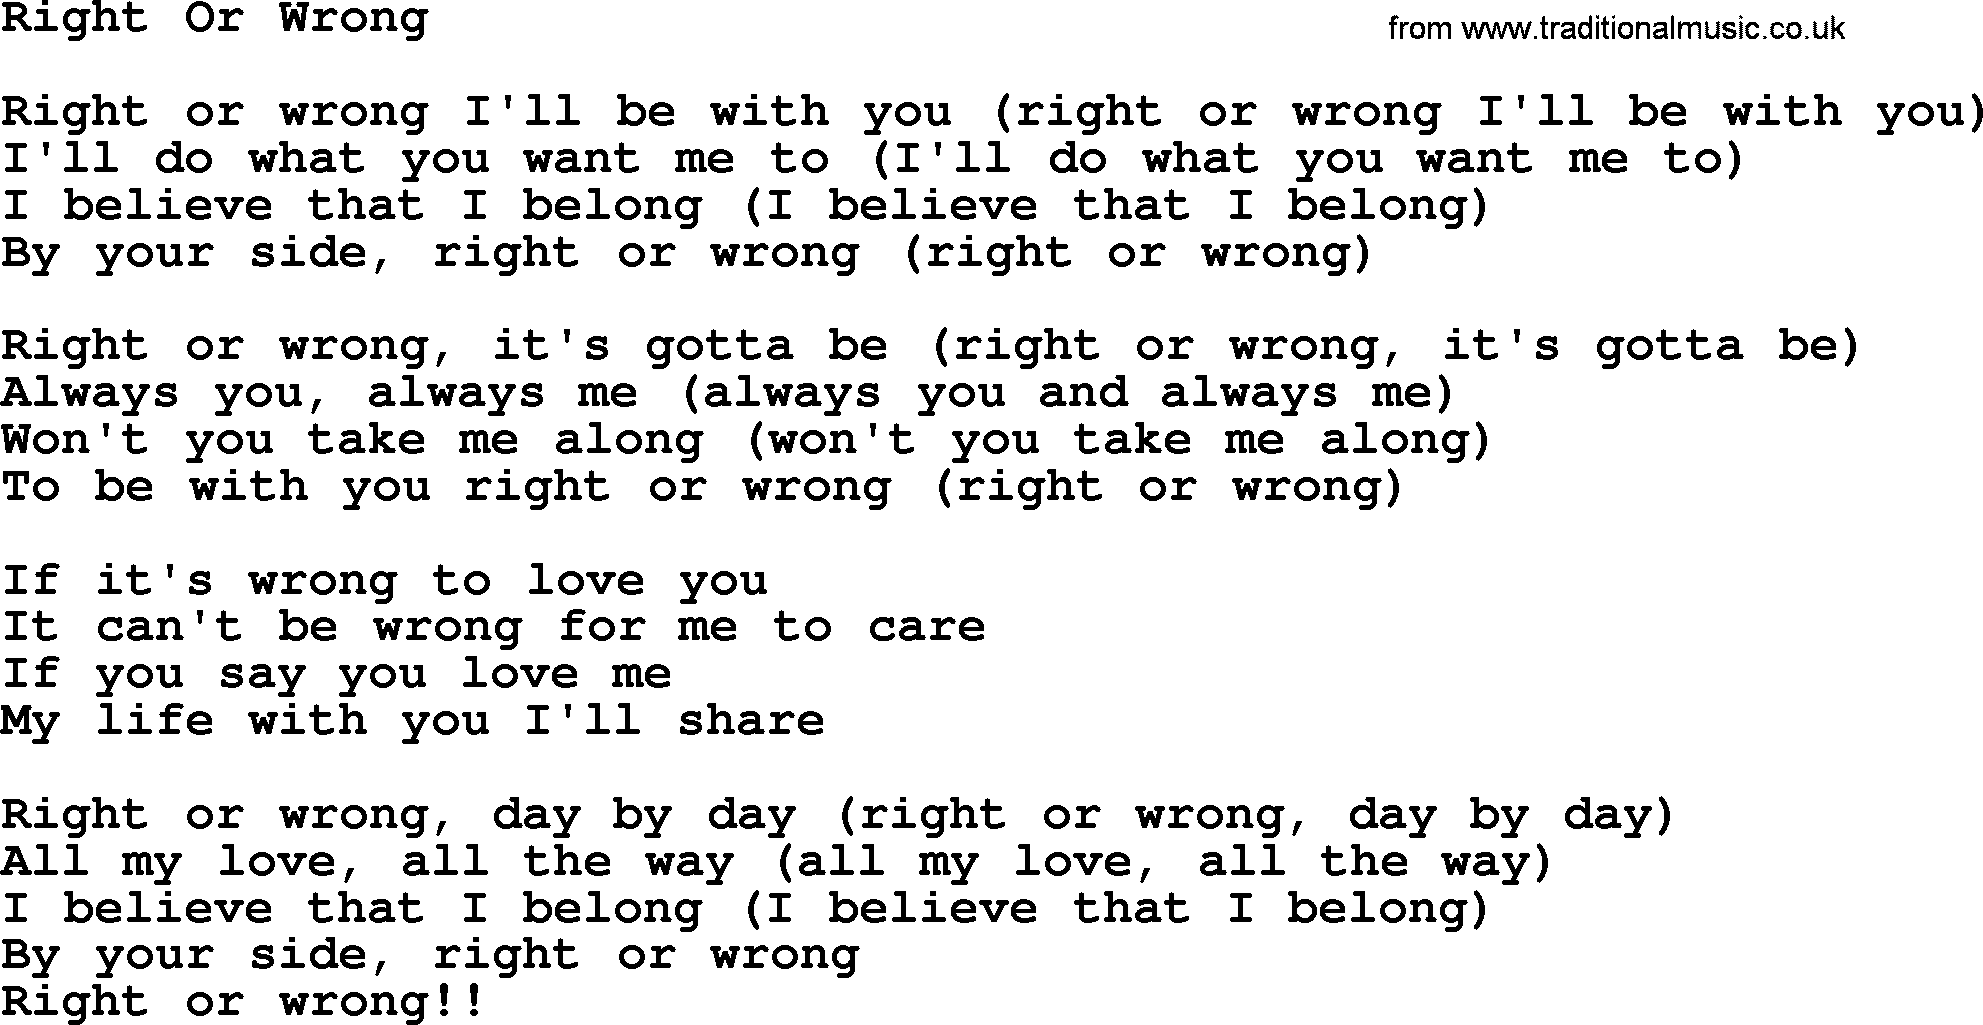 Willie Nelson song: Right Or Wrong lyrics